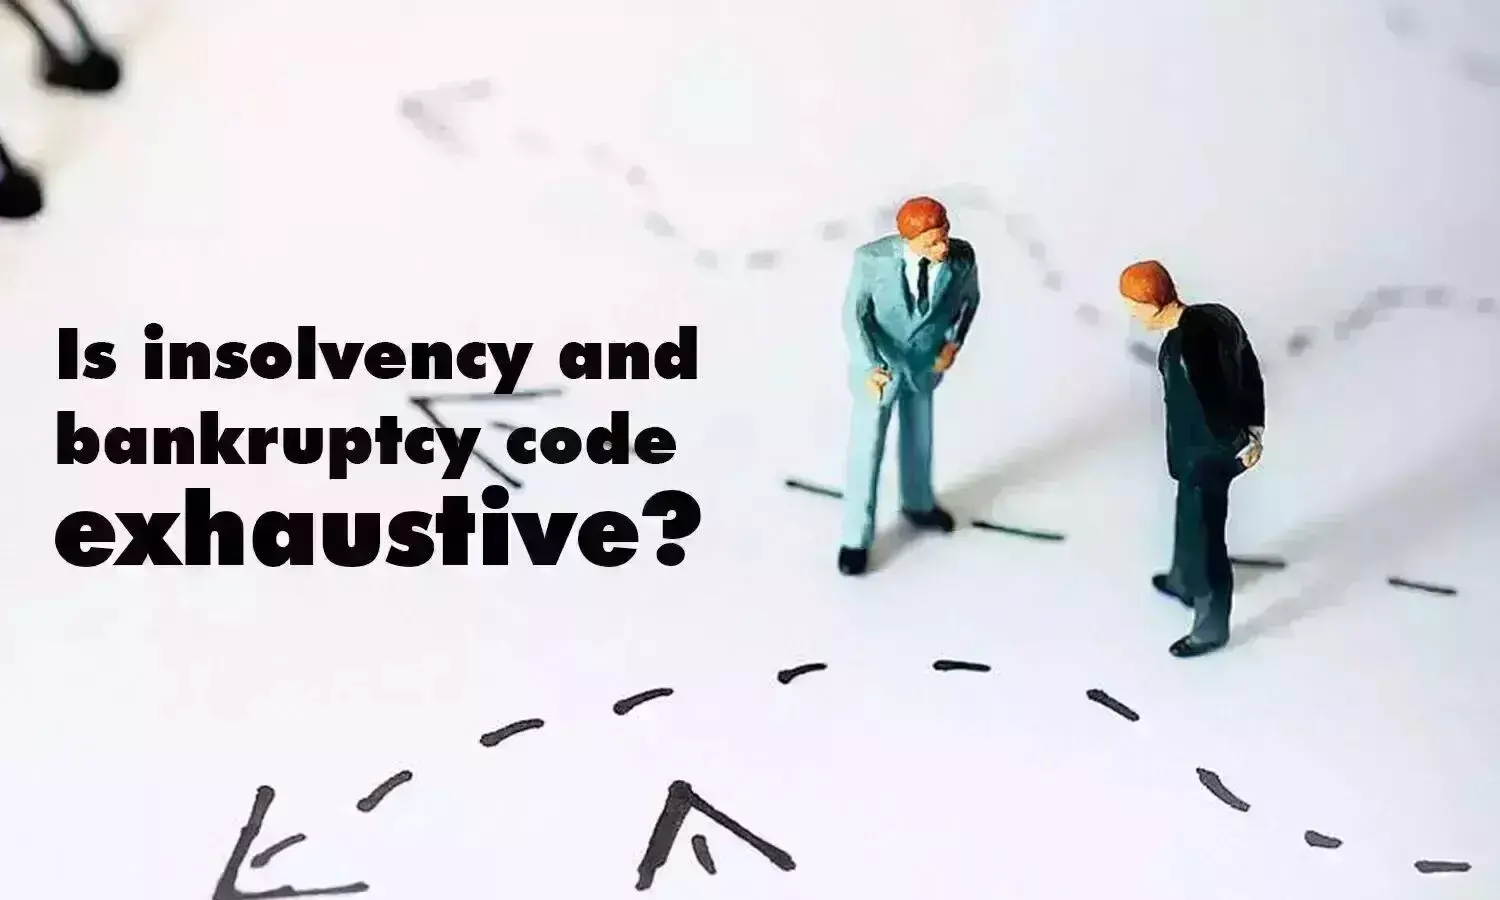 Is insolvency and bankruptcy code exhaustive?